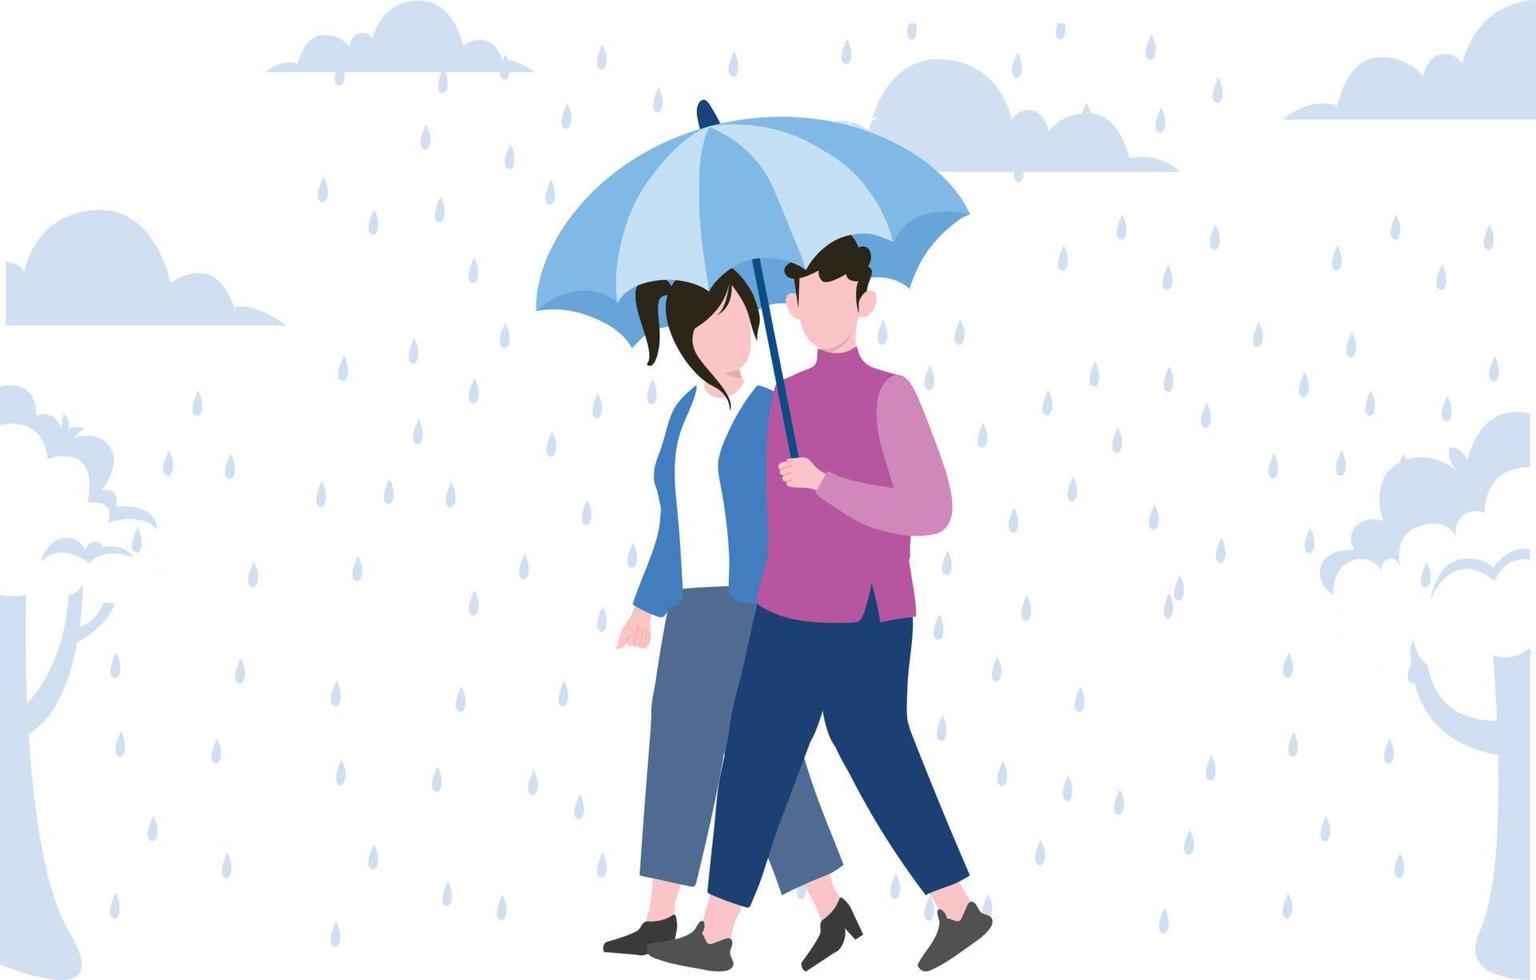 The couple is walking in the rain with an umbrella. vector